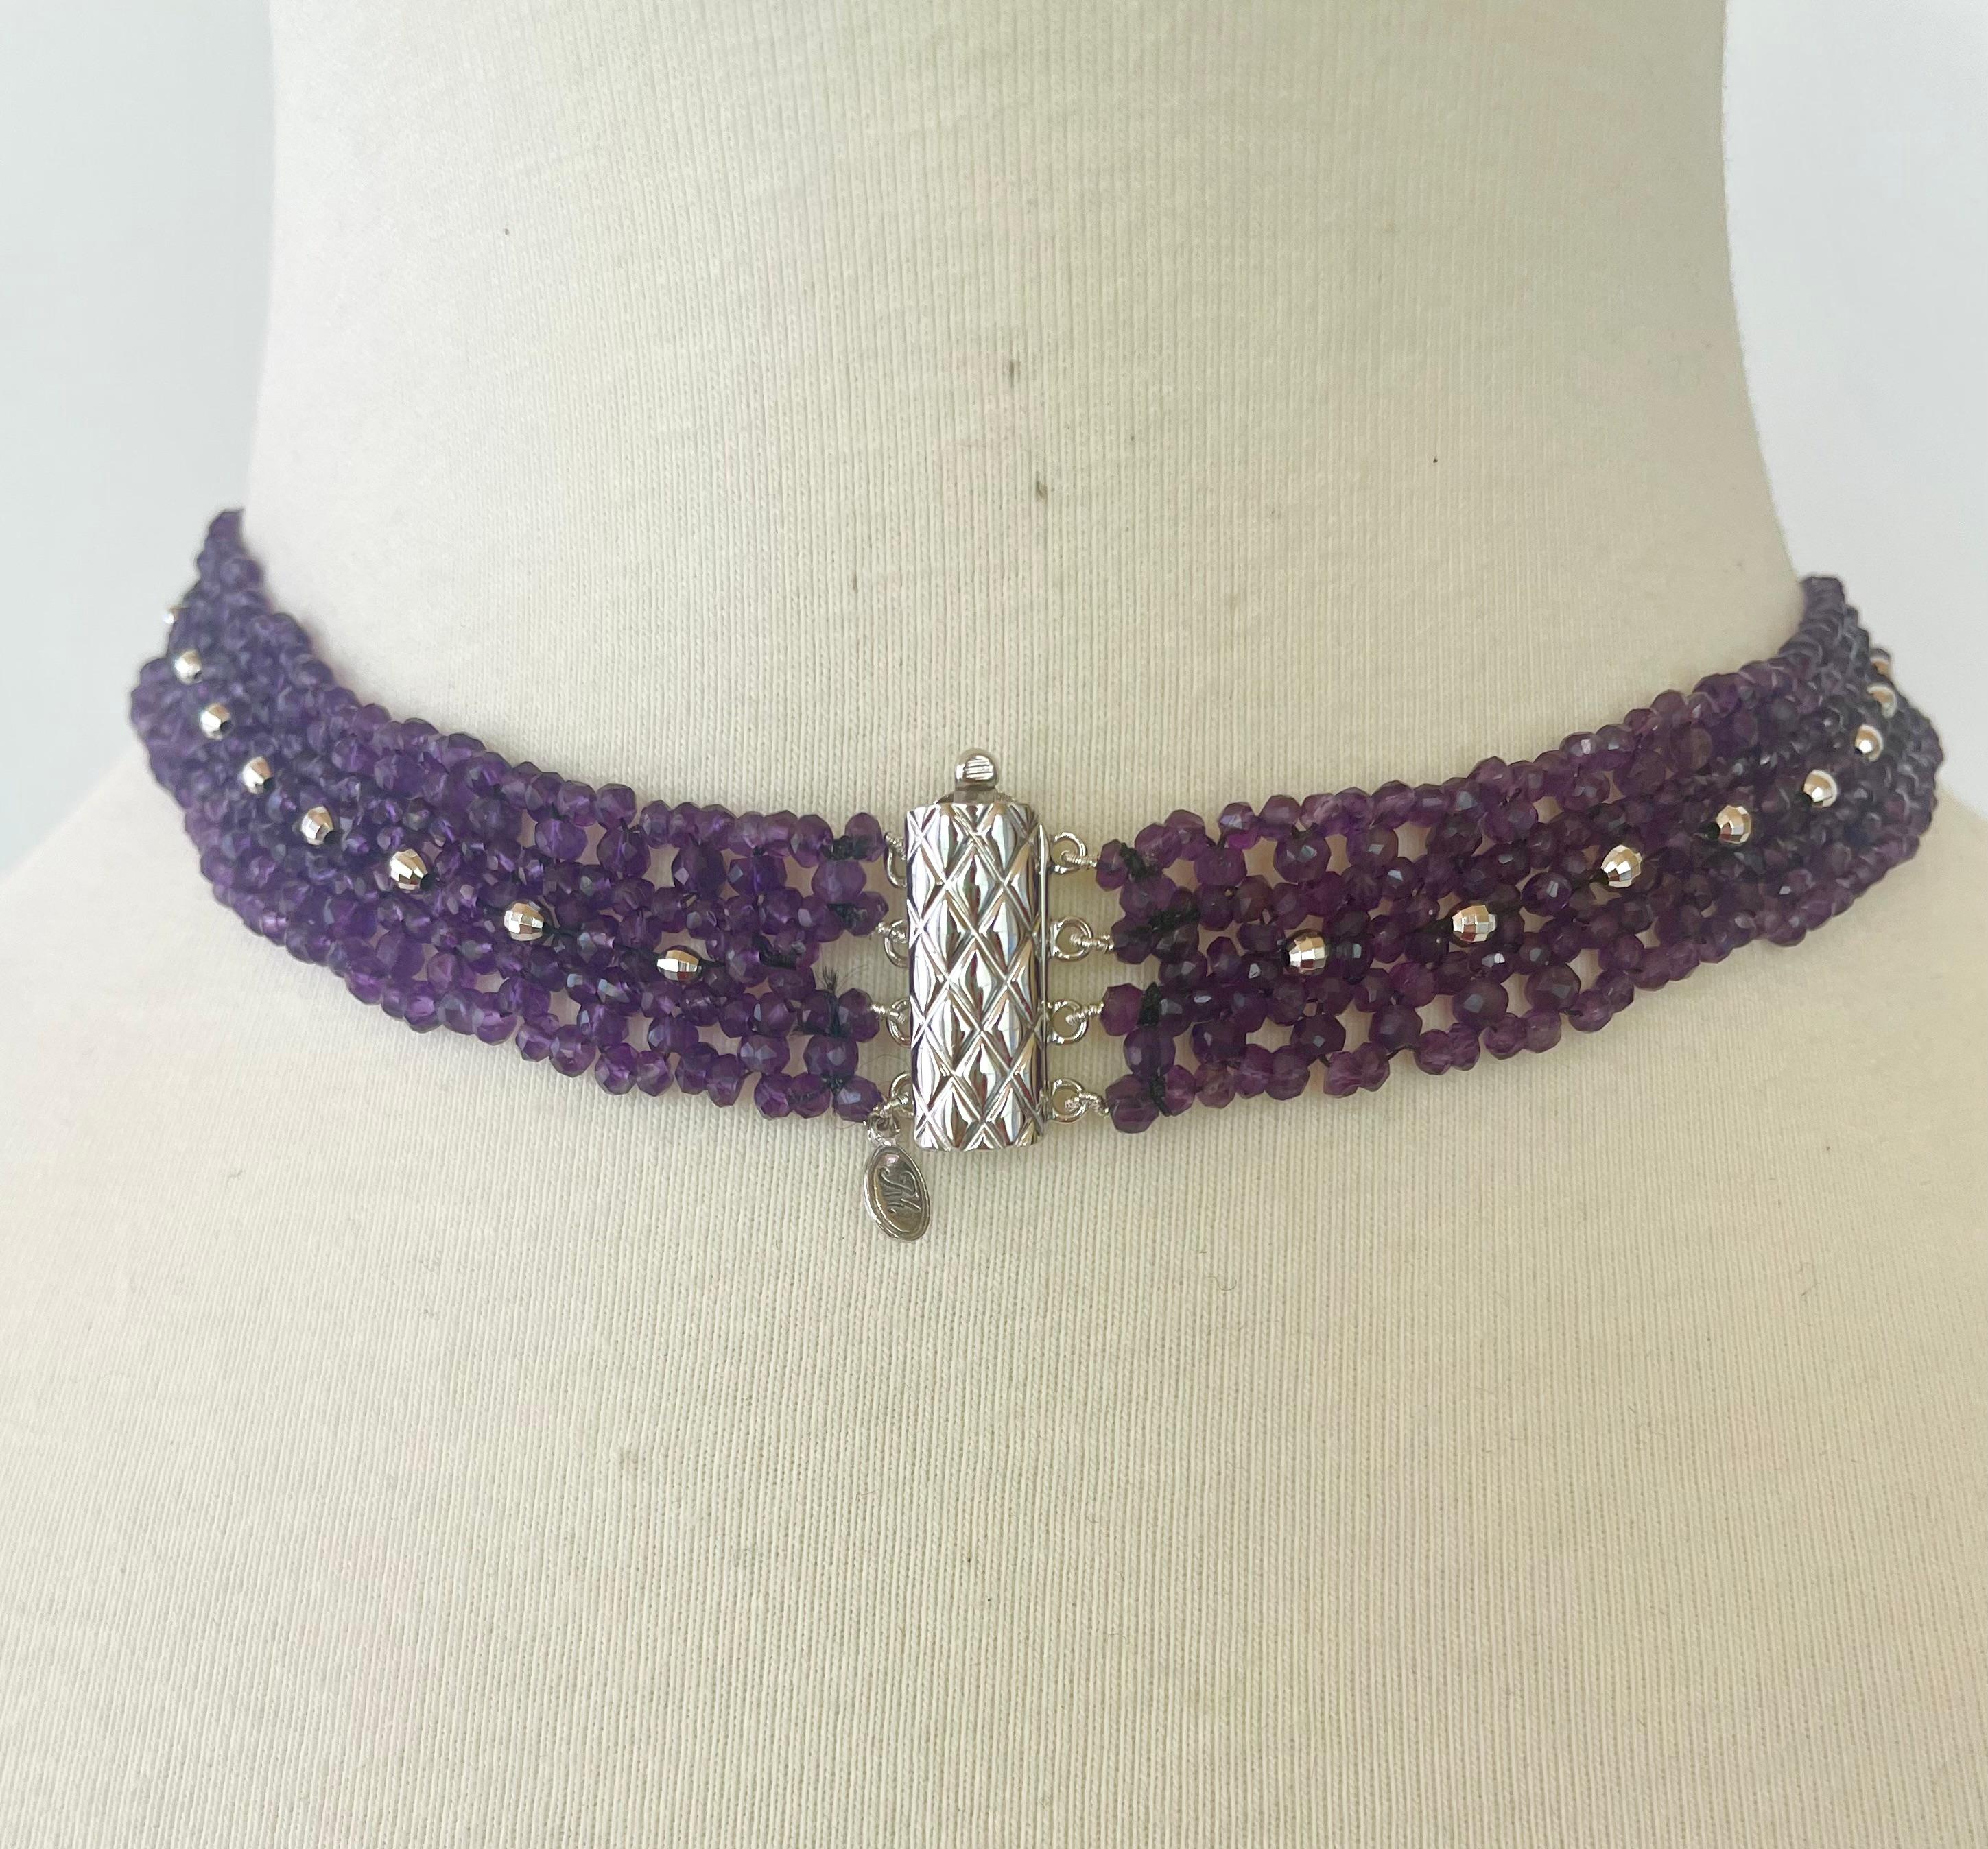 Woven Amethyst Necklace with Silver Butterfly Centerpiece For Sale 2